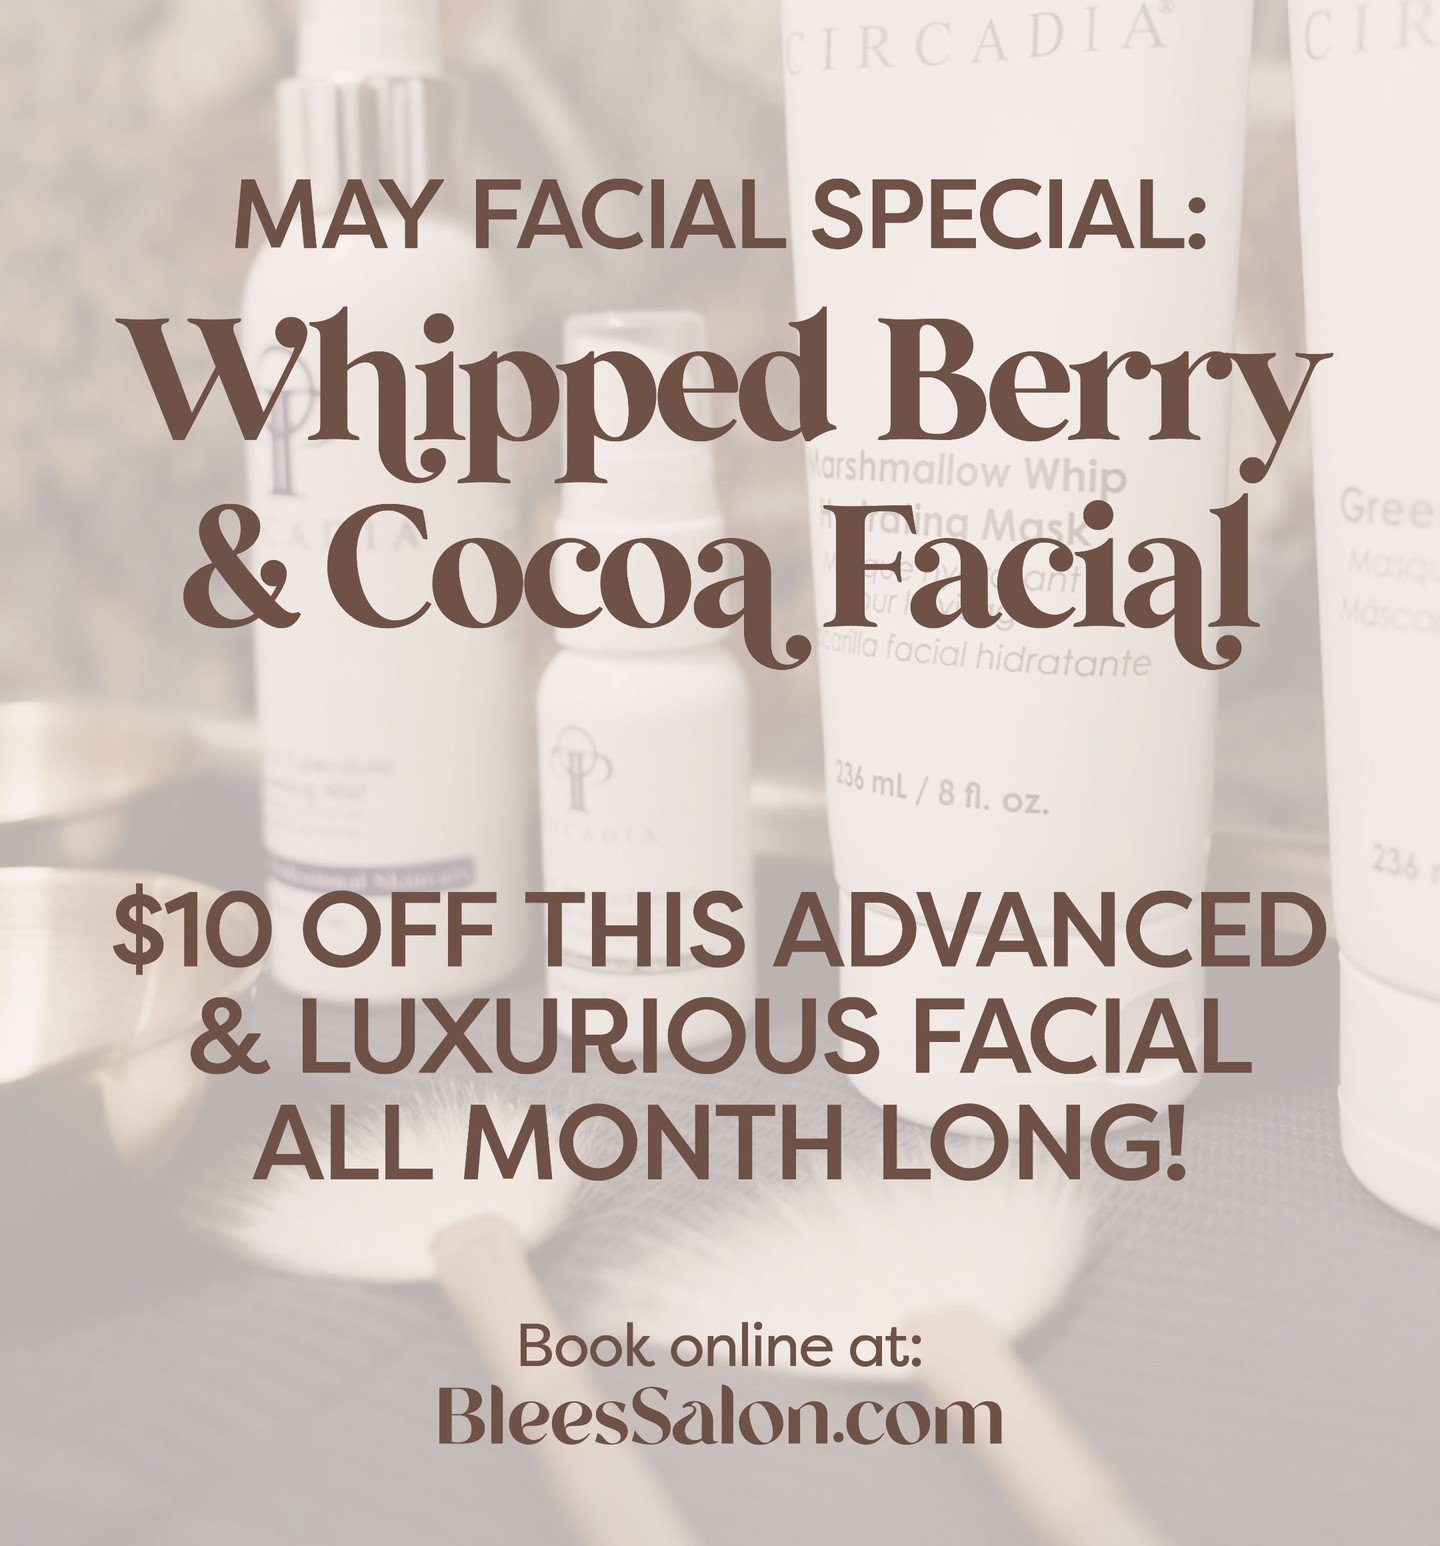 MAY FACIAL SPECIAL 🍓🍫
All month long, save $10 on this anti-aging and antioxidant-rich facial. Book online or call (518) 585-2557. 

#esthetician #aesthetician #aestheticianlife #licensedesthetician #skinexpert #skincareprofessional #skinhealth